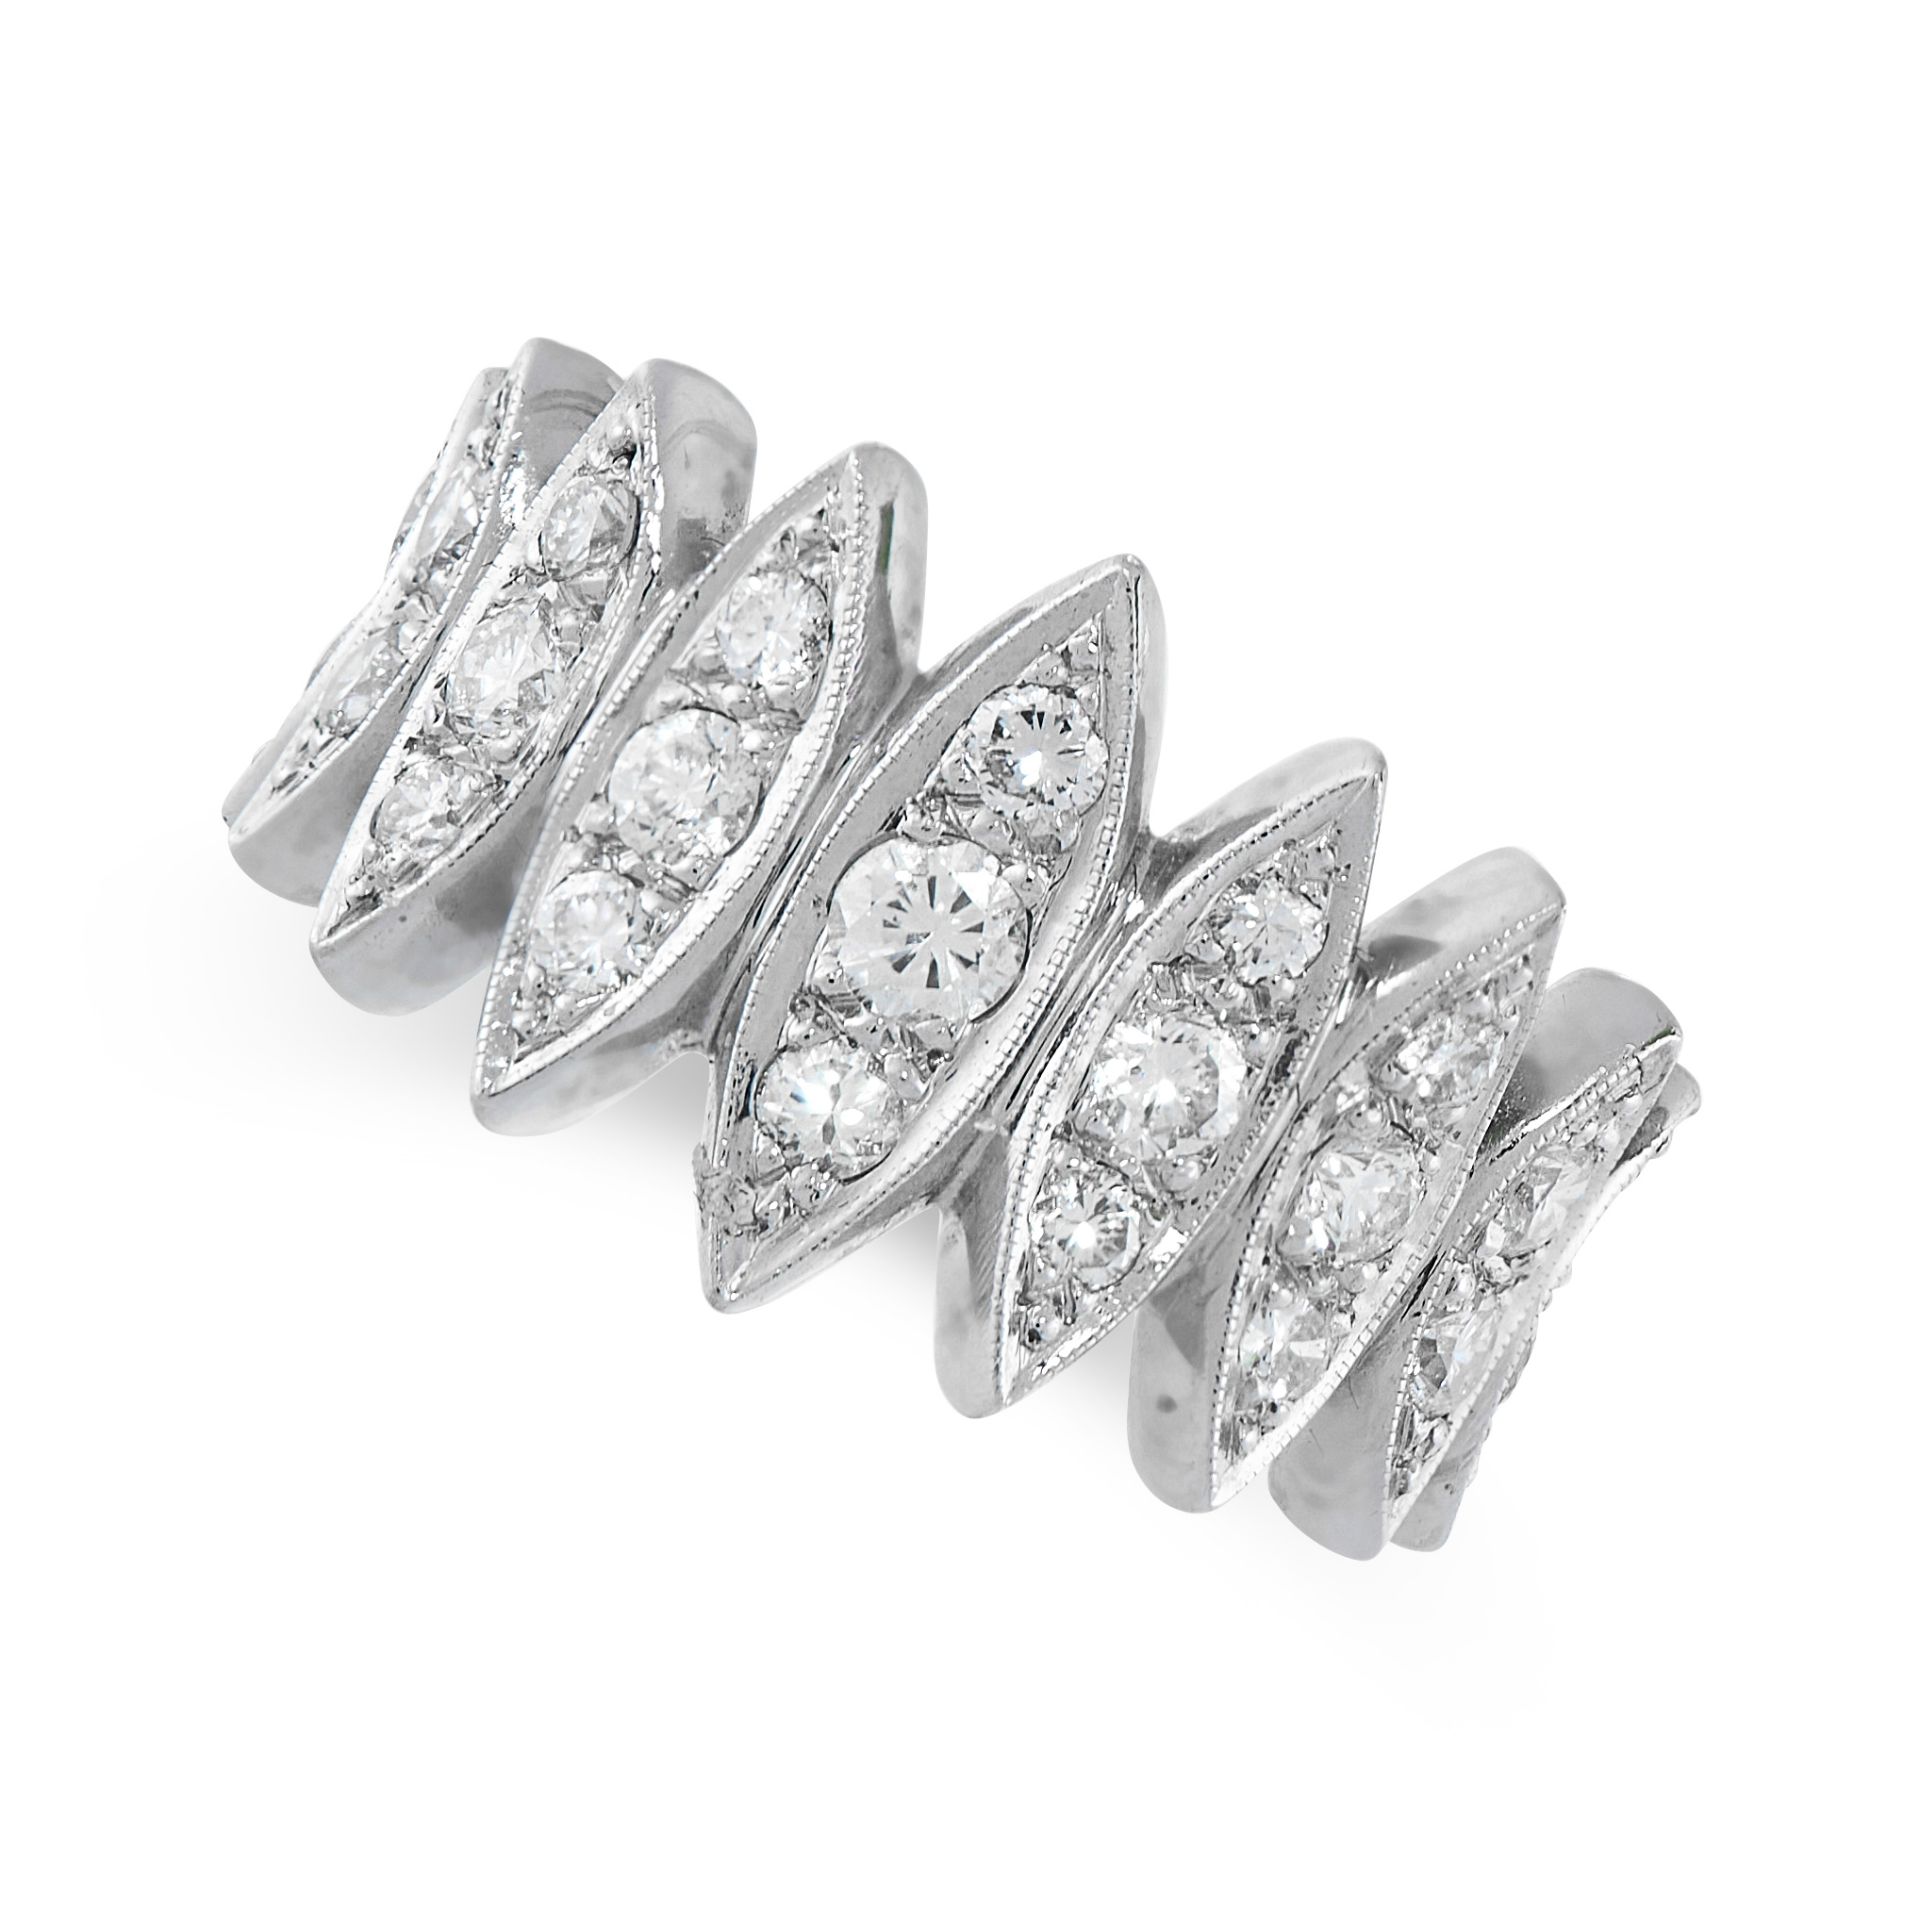 A DIAMOND ETERNITY RING composed of graduated navette-shaped motifs pave-set with round cut diamonds